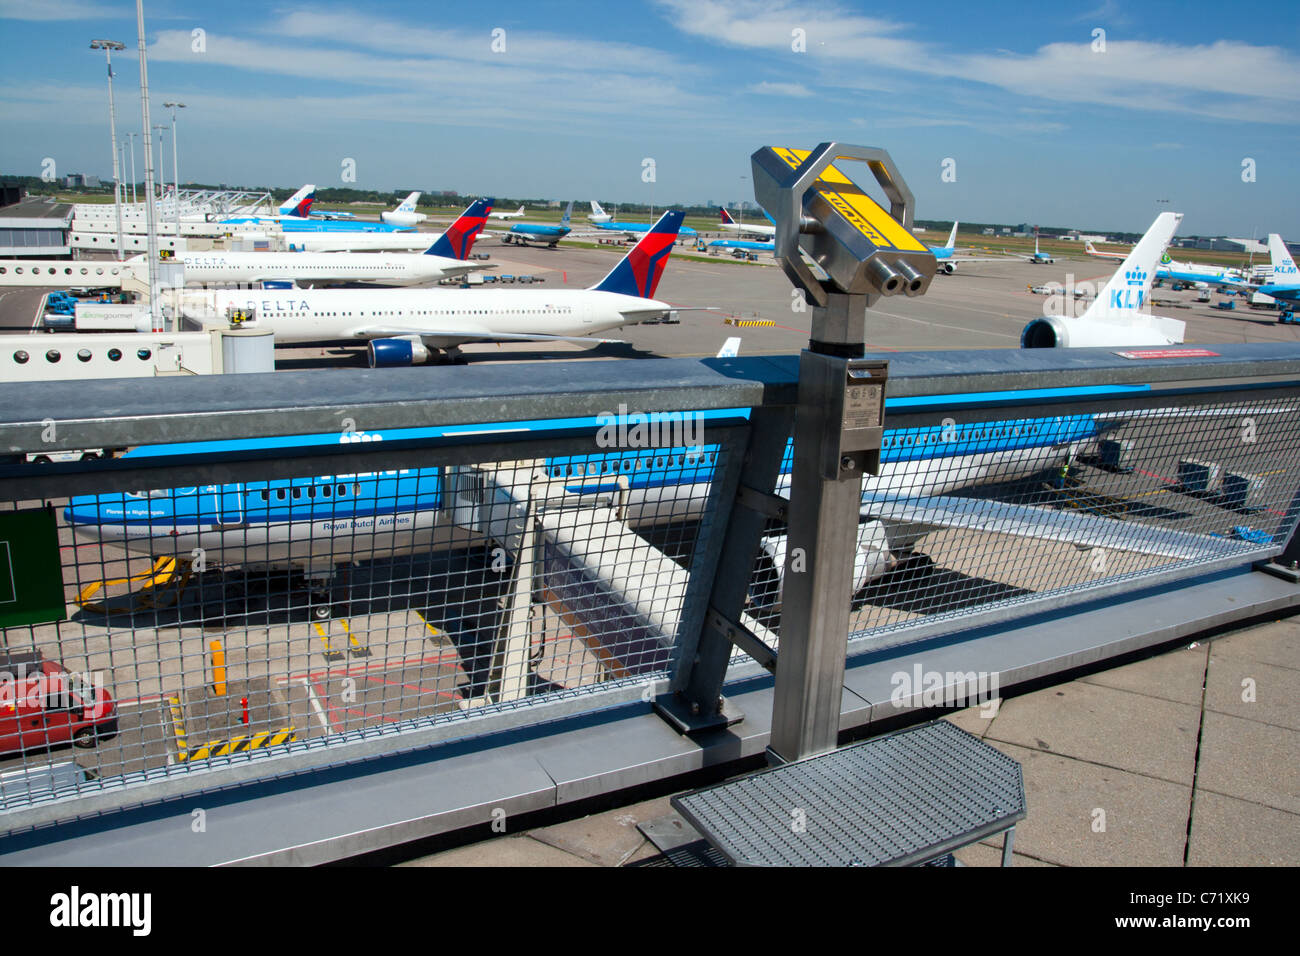 Row of planes seen fromt he viewing deck at Amsterdam-Schiphol airport in Holland Stock Photo